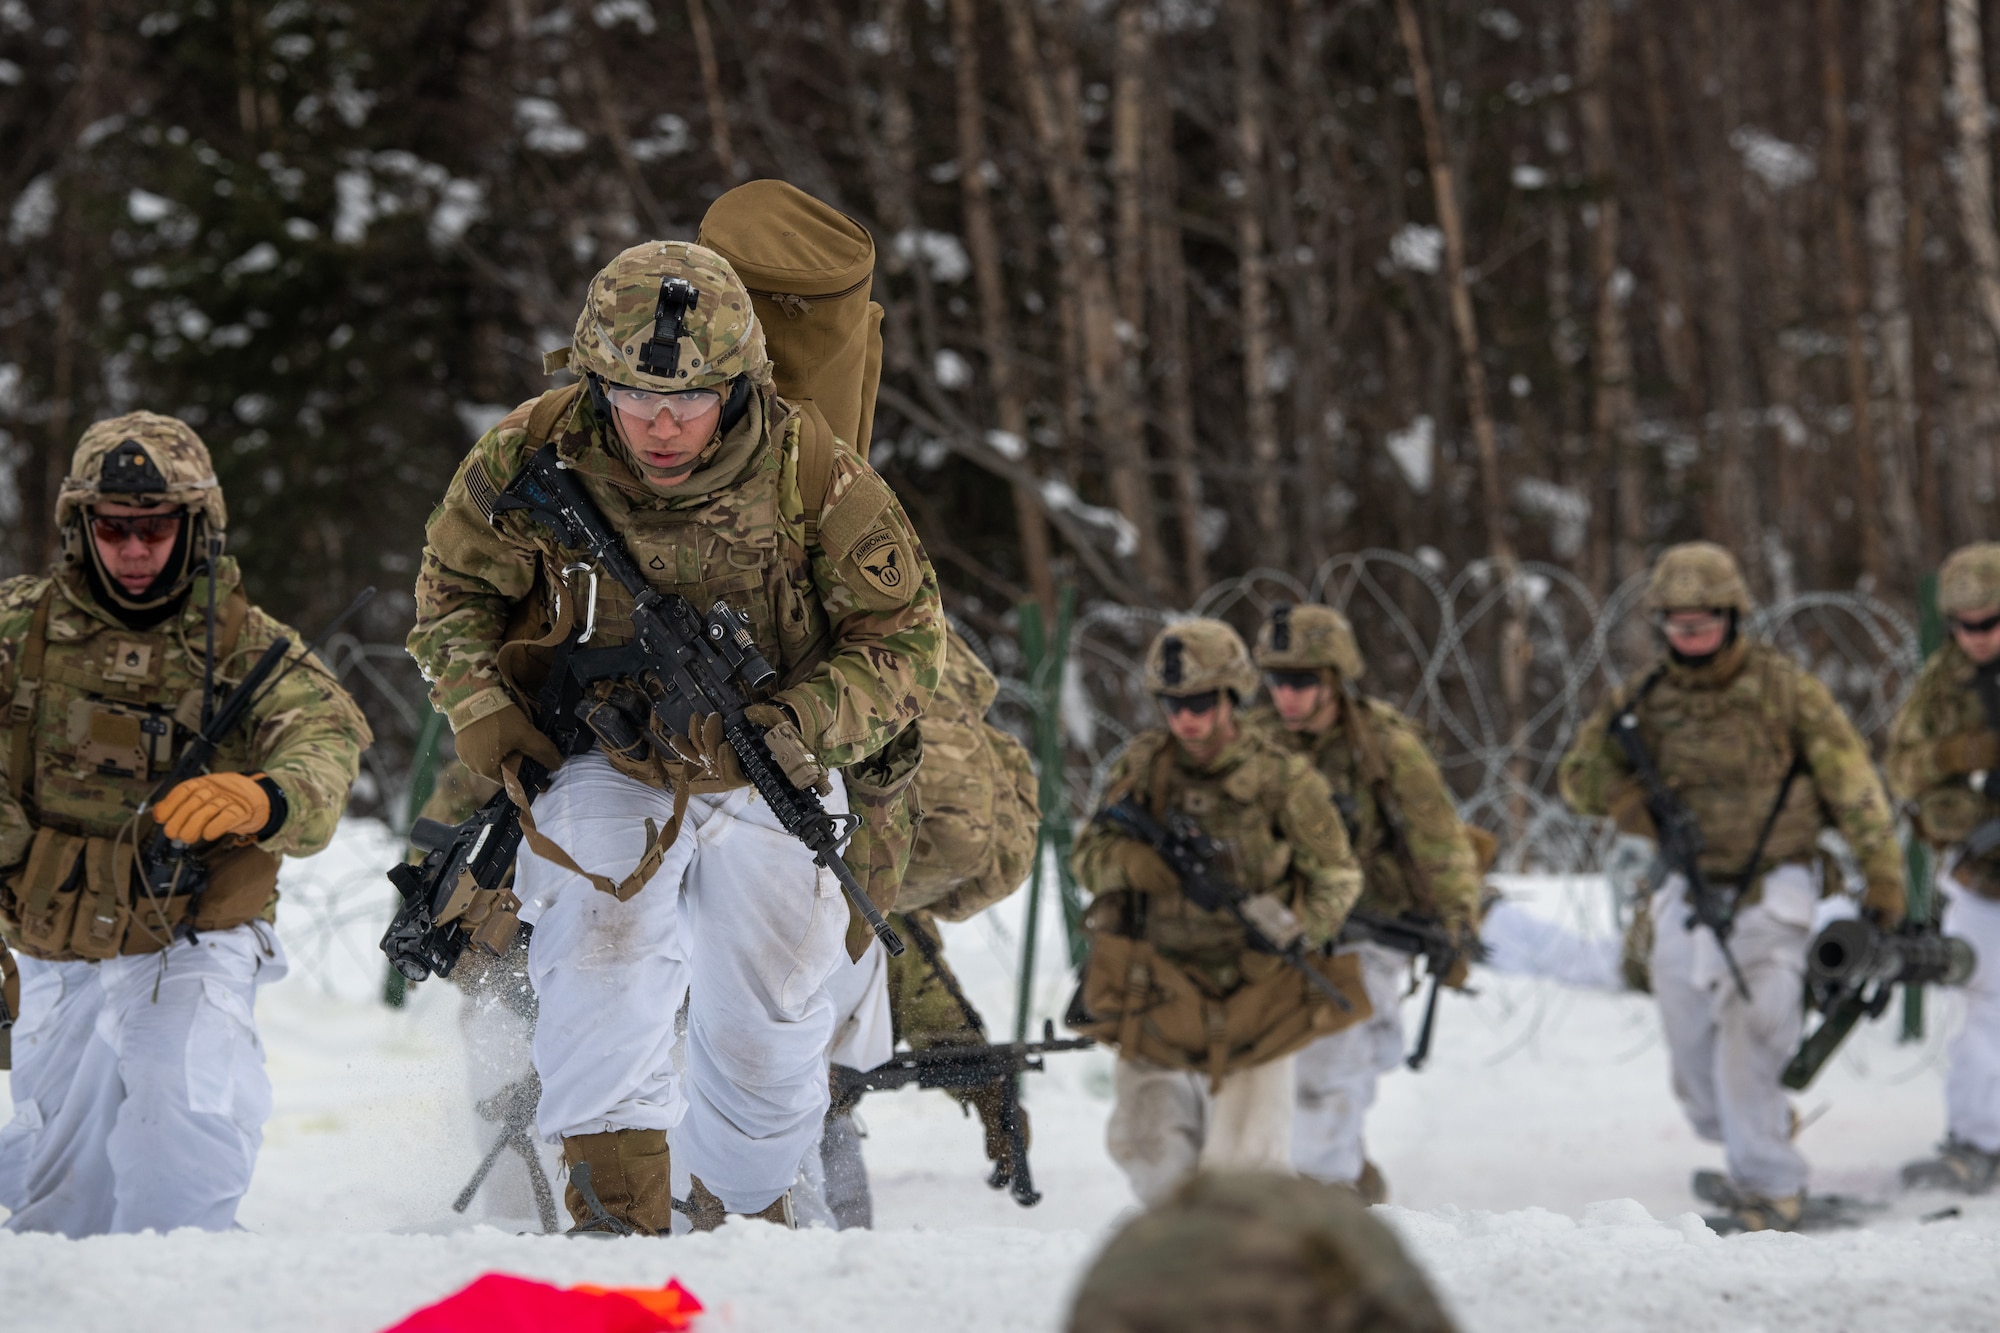 A photo of a group of soldiers advancing through the snow